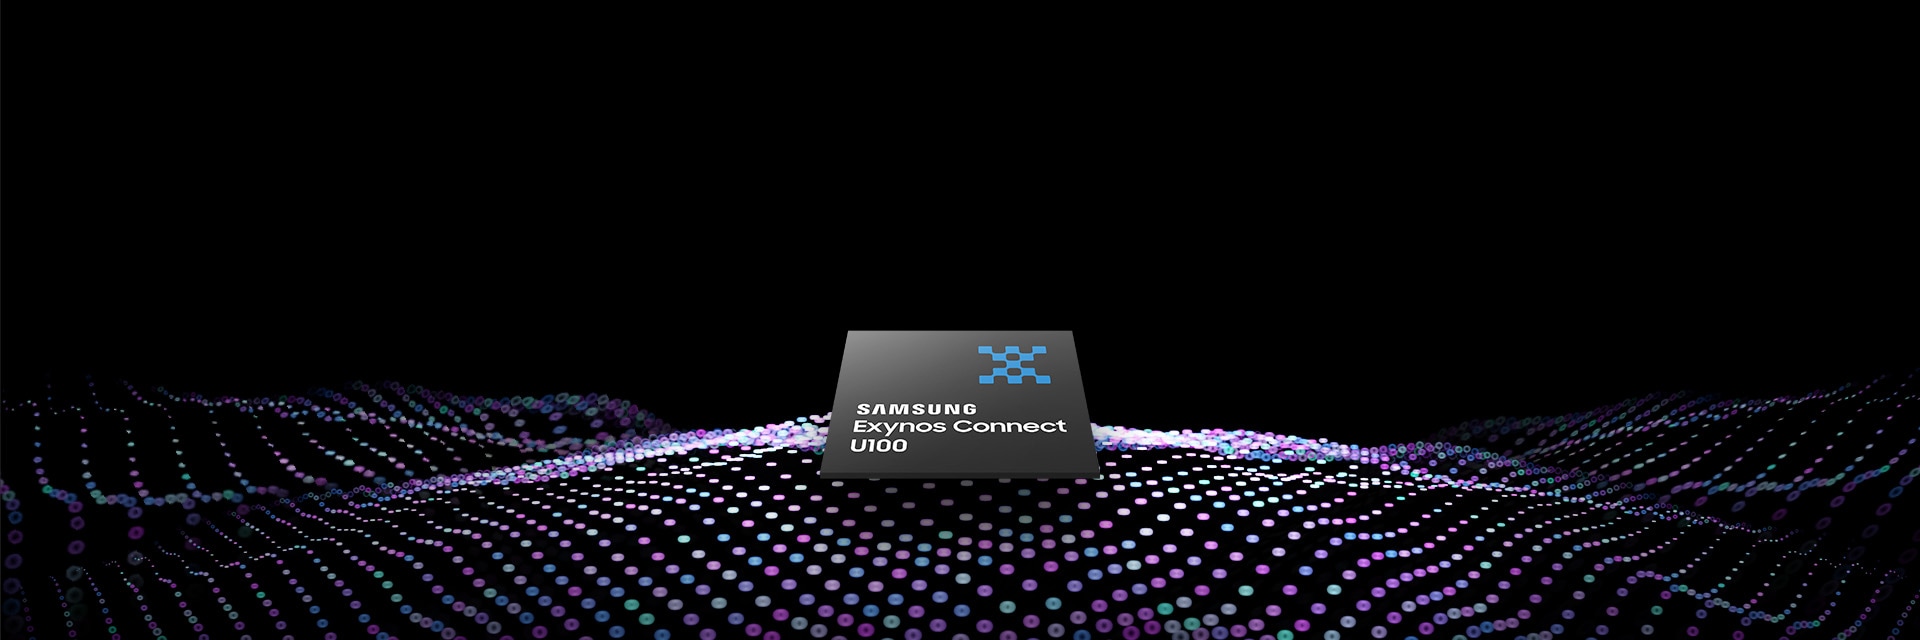 Samsung Exynos Connect U100 chip. Connect to ultra-wide experiences. Samsung Semiconductor